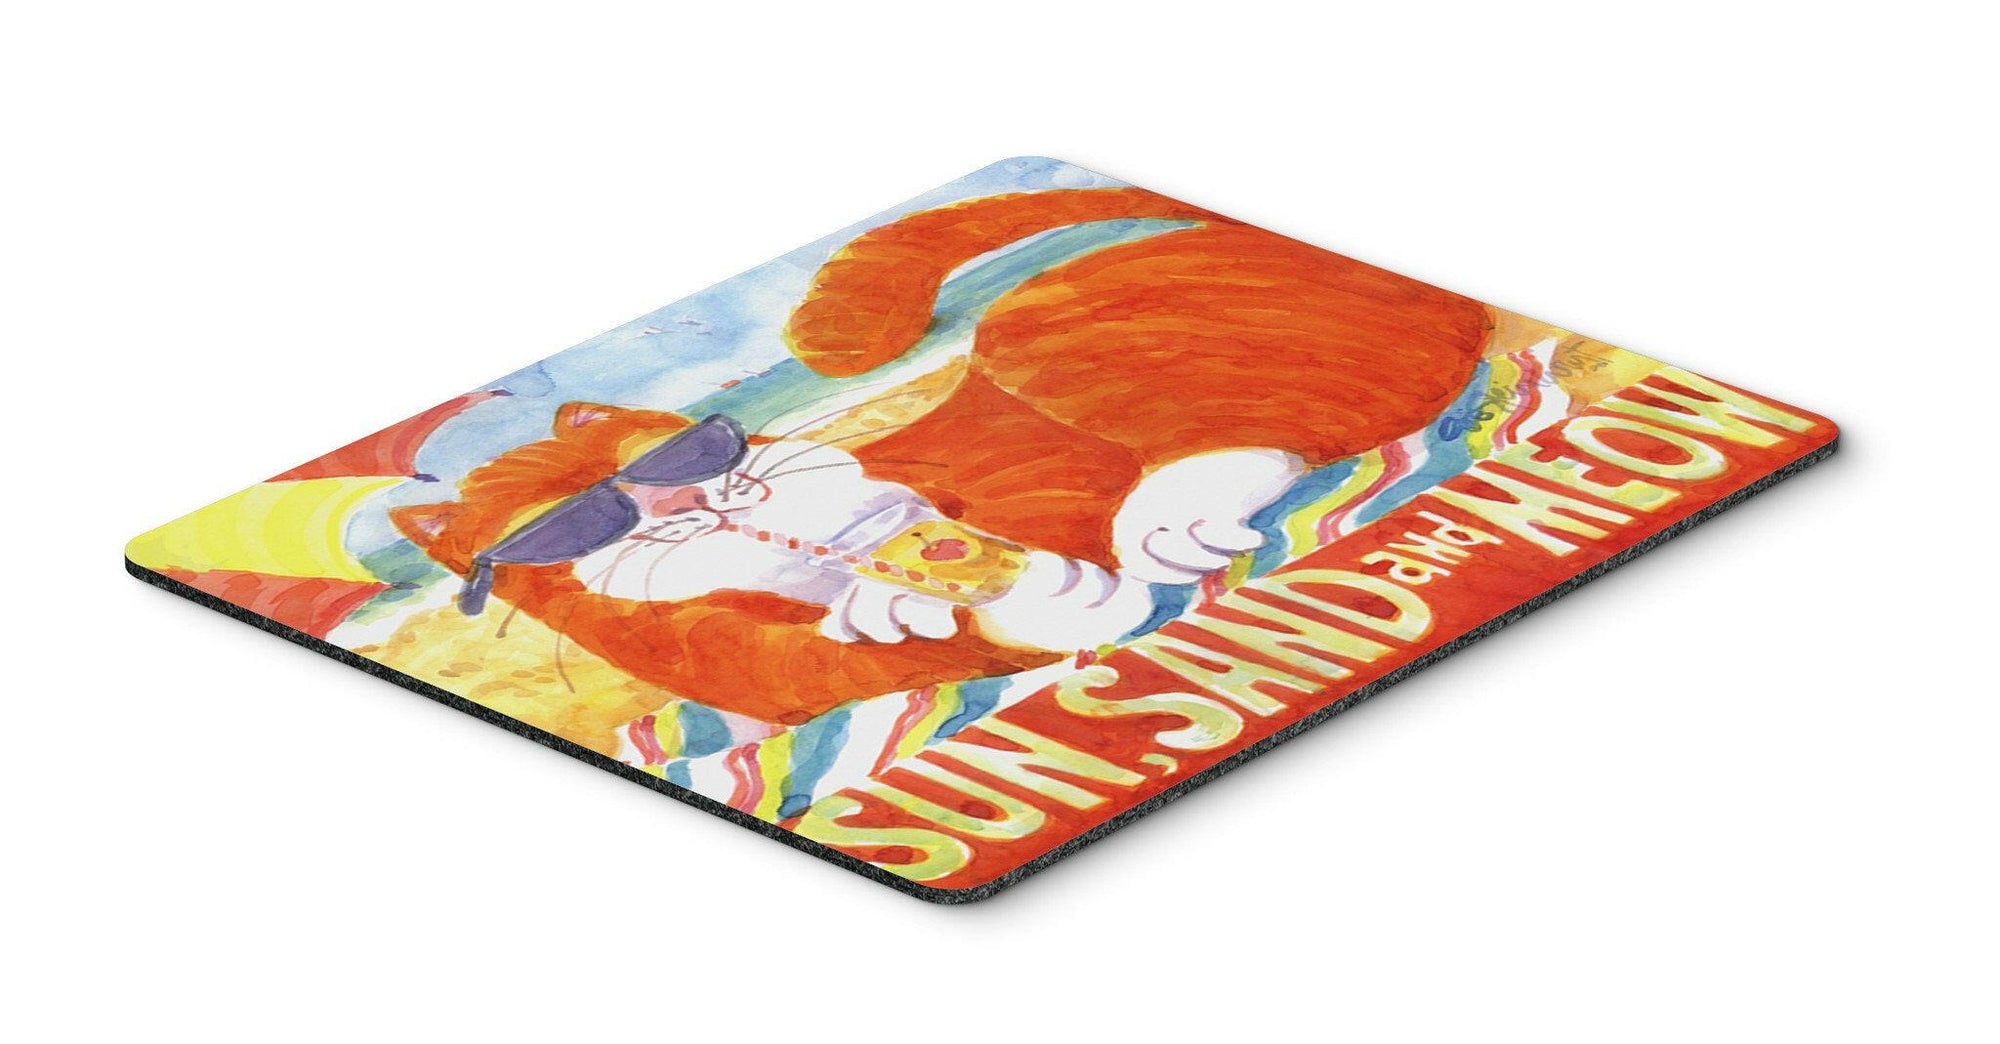 Orange Tabby at the beach Mouse pad, hot pad, or trivet by Caroline's Treasures